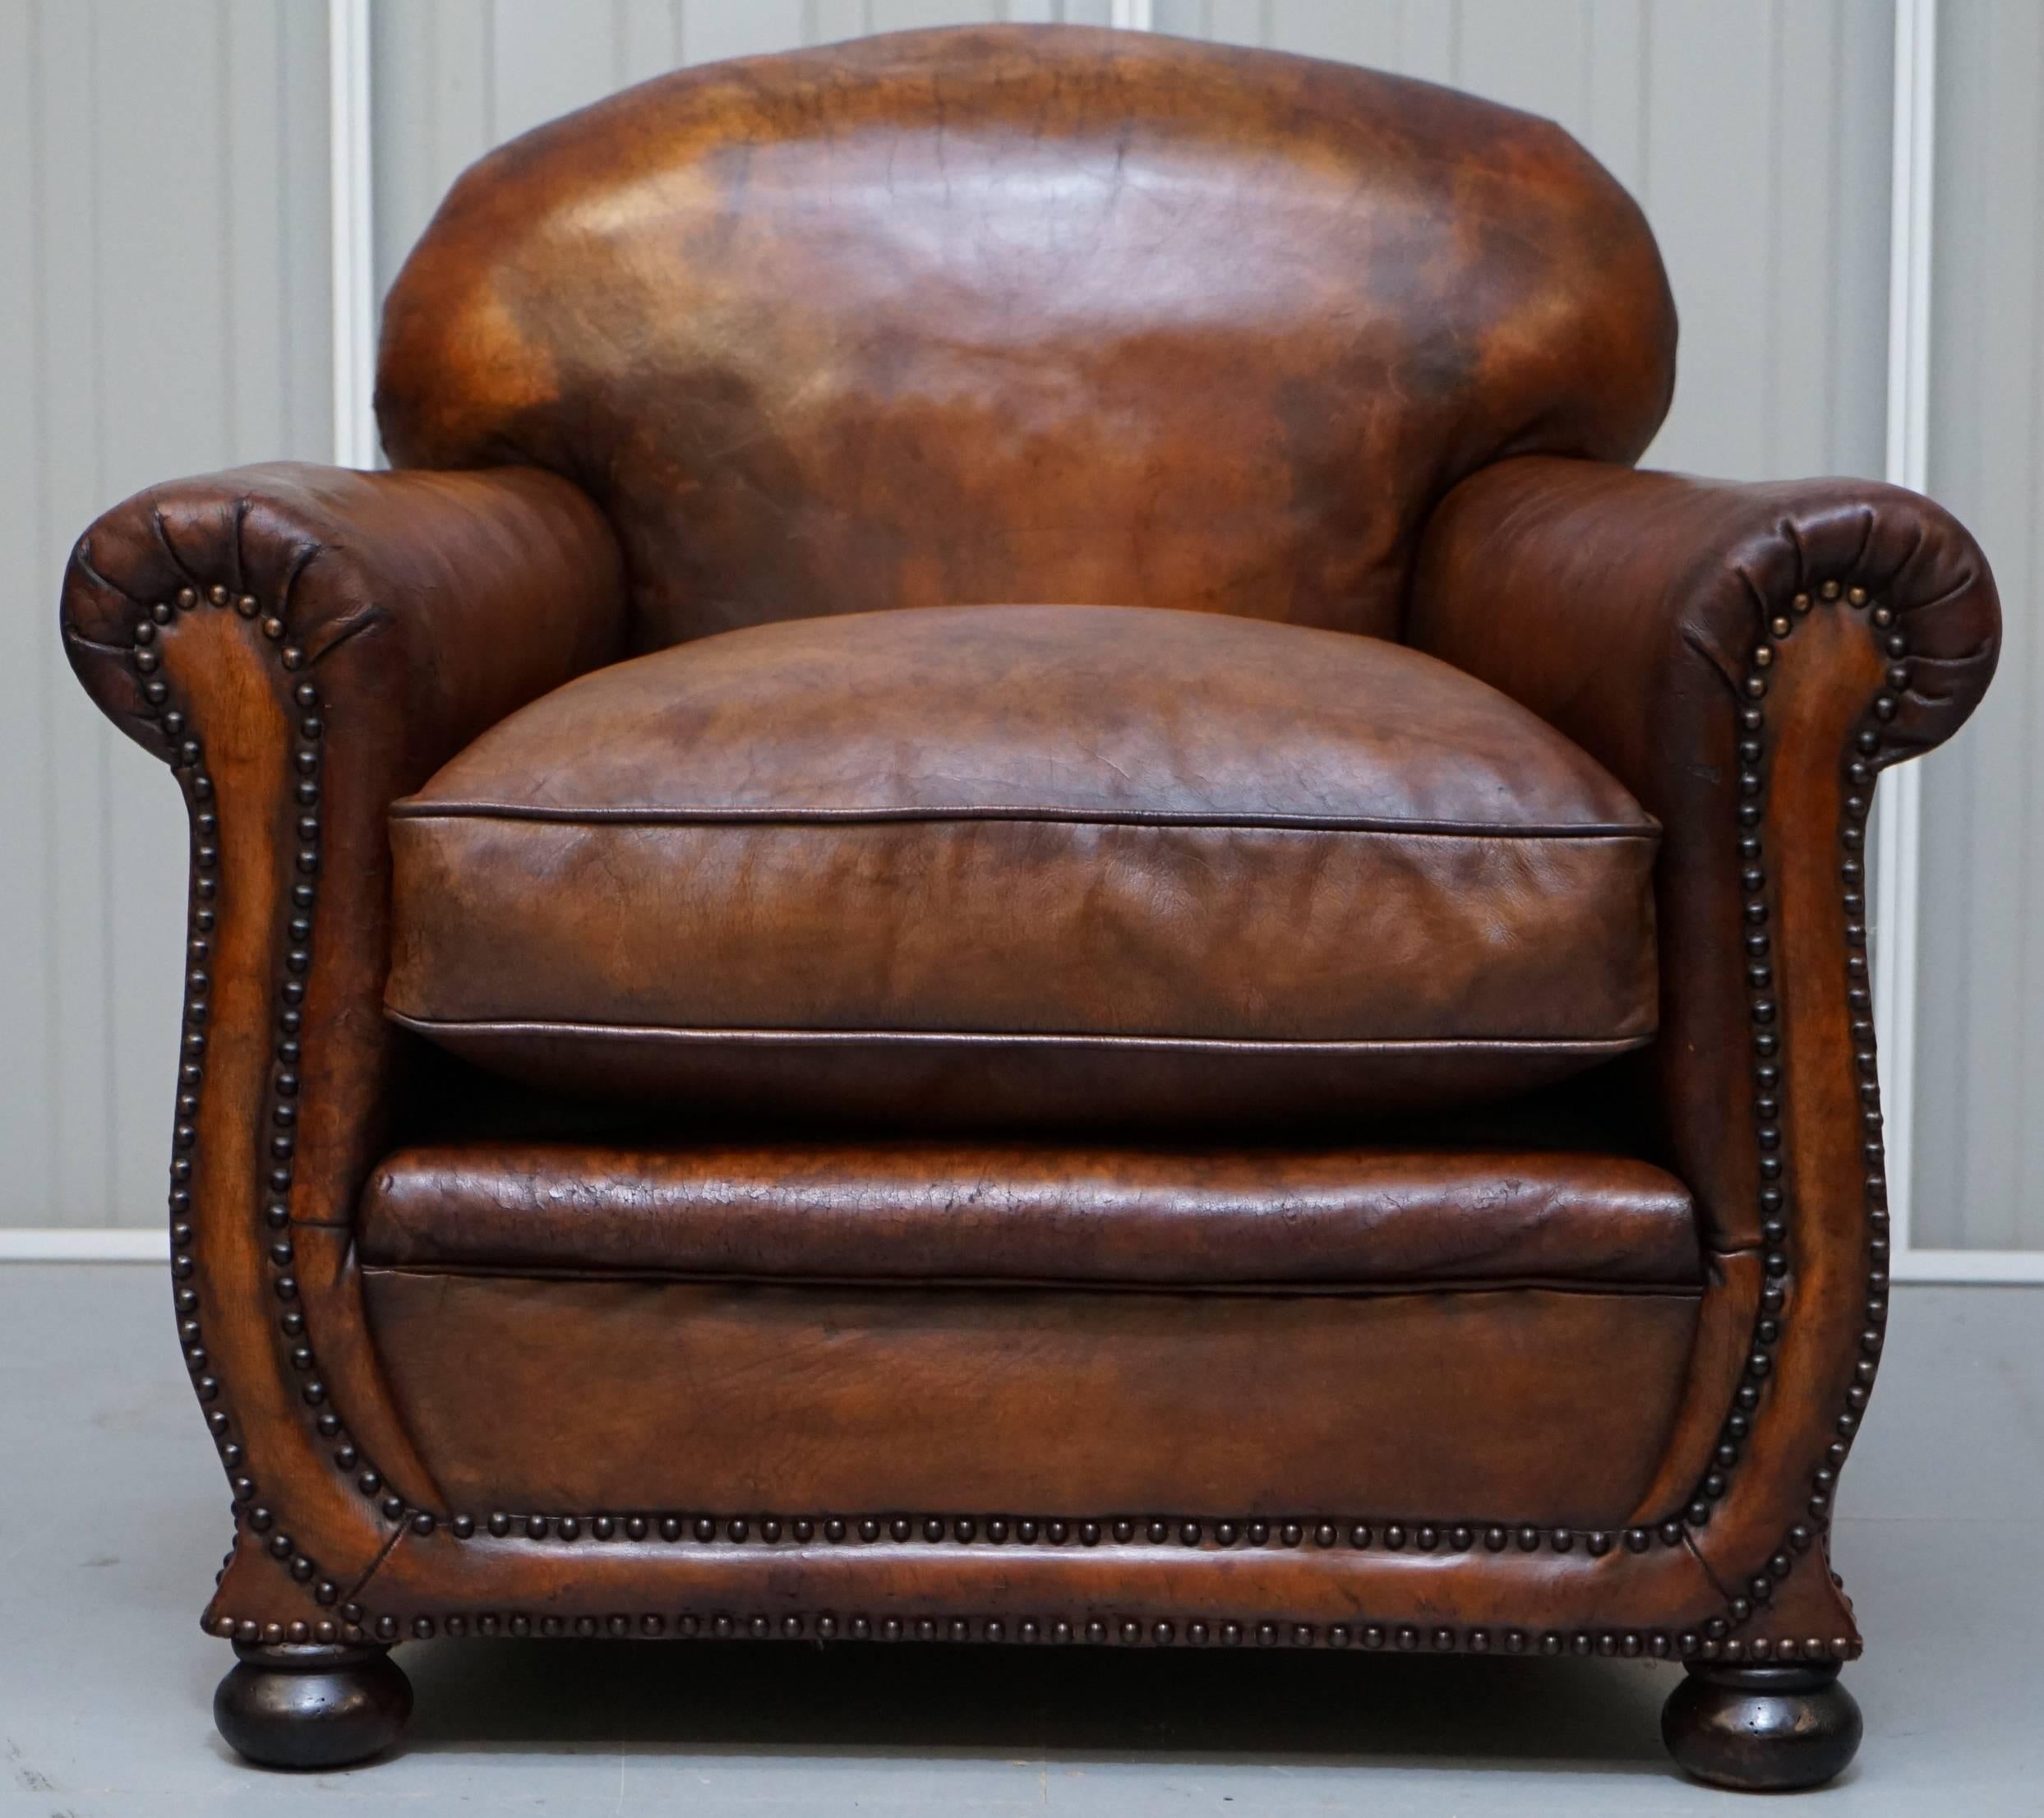 Great Britain (UK) Edwardian Gentleman's Club Three-Piece Suite Pair of Armchairs and Sofa